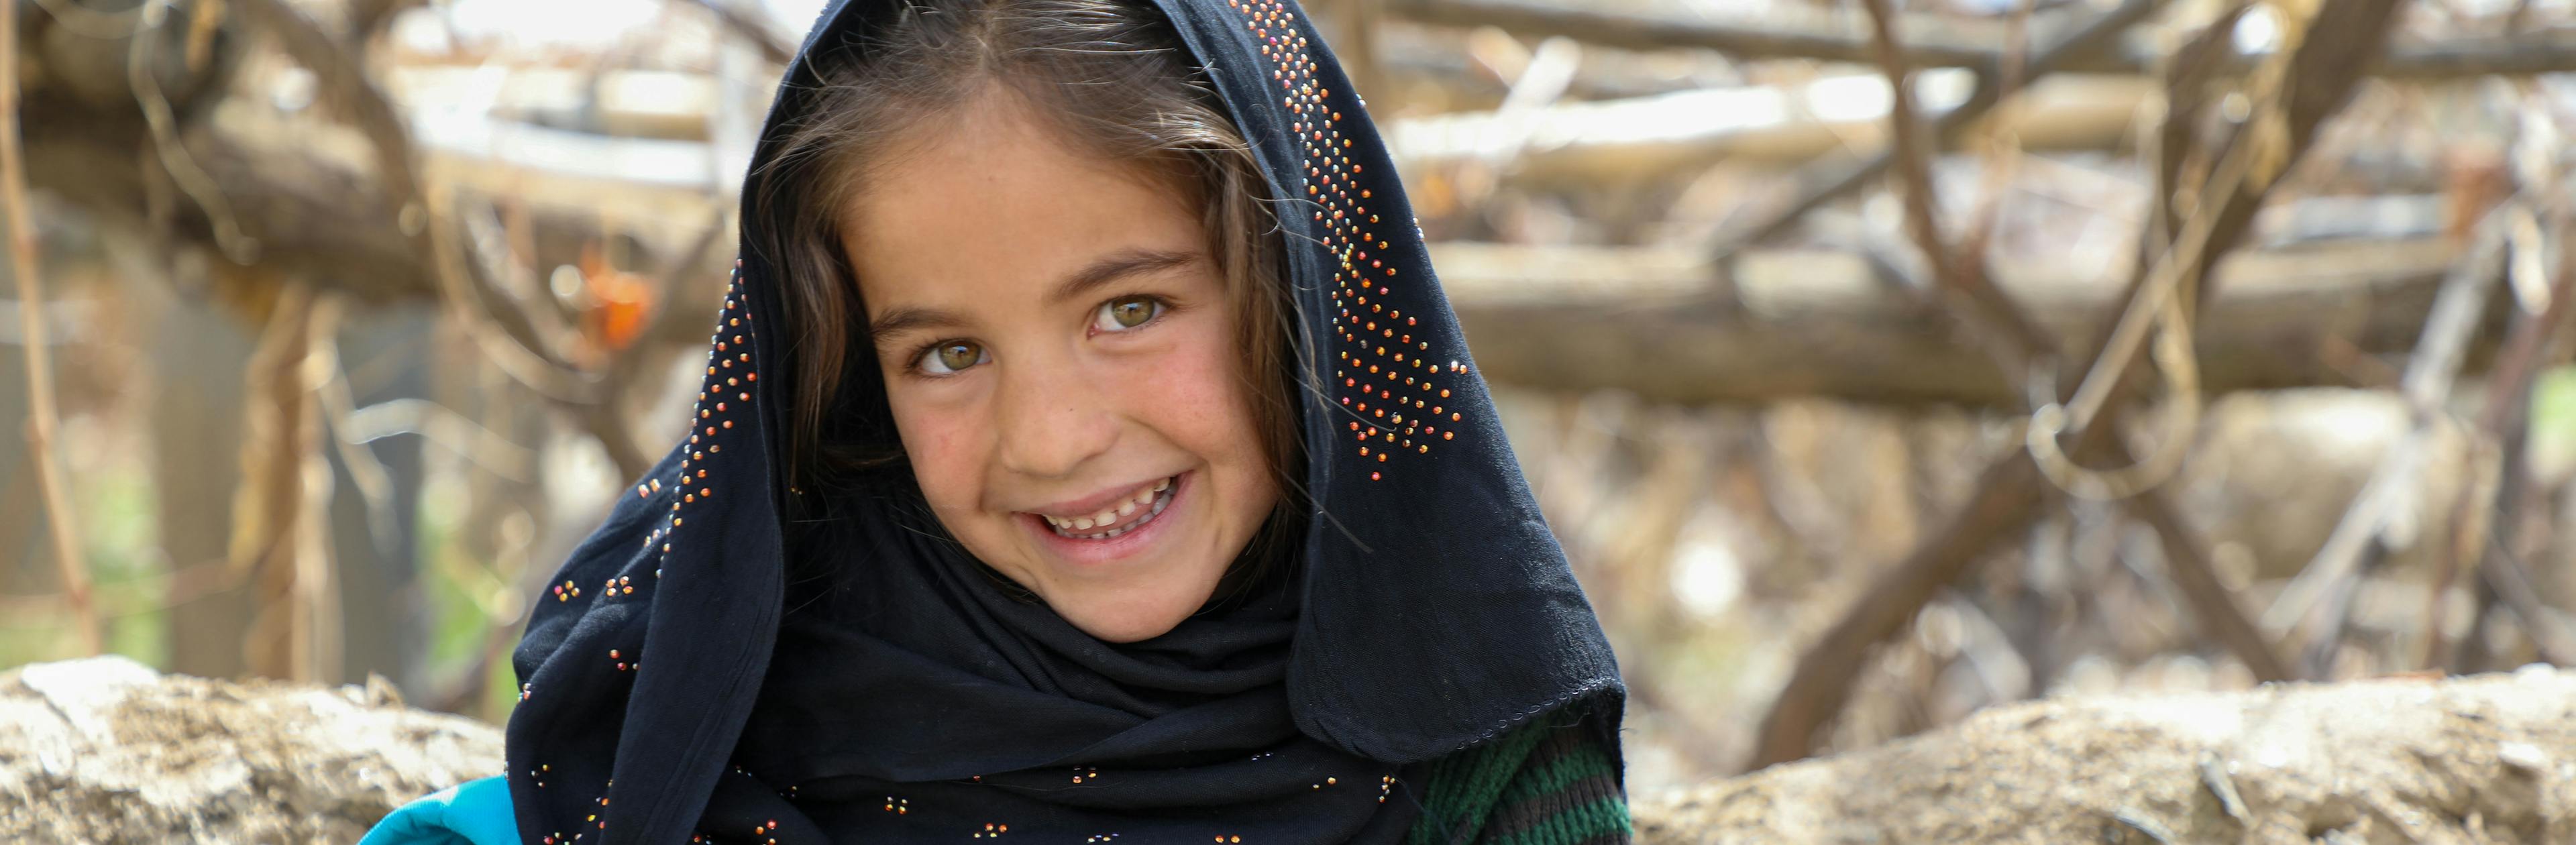 The girls at Gulab Khail Village's community-based accelerated learning centre in Maidan Wardak Province have recently completed primary grade one and have just begun primary grade two. The centre provides an accelerated curriculum so students can complete 6 years of primary school in 3 years.